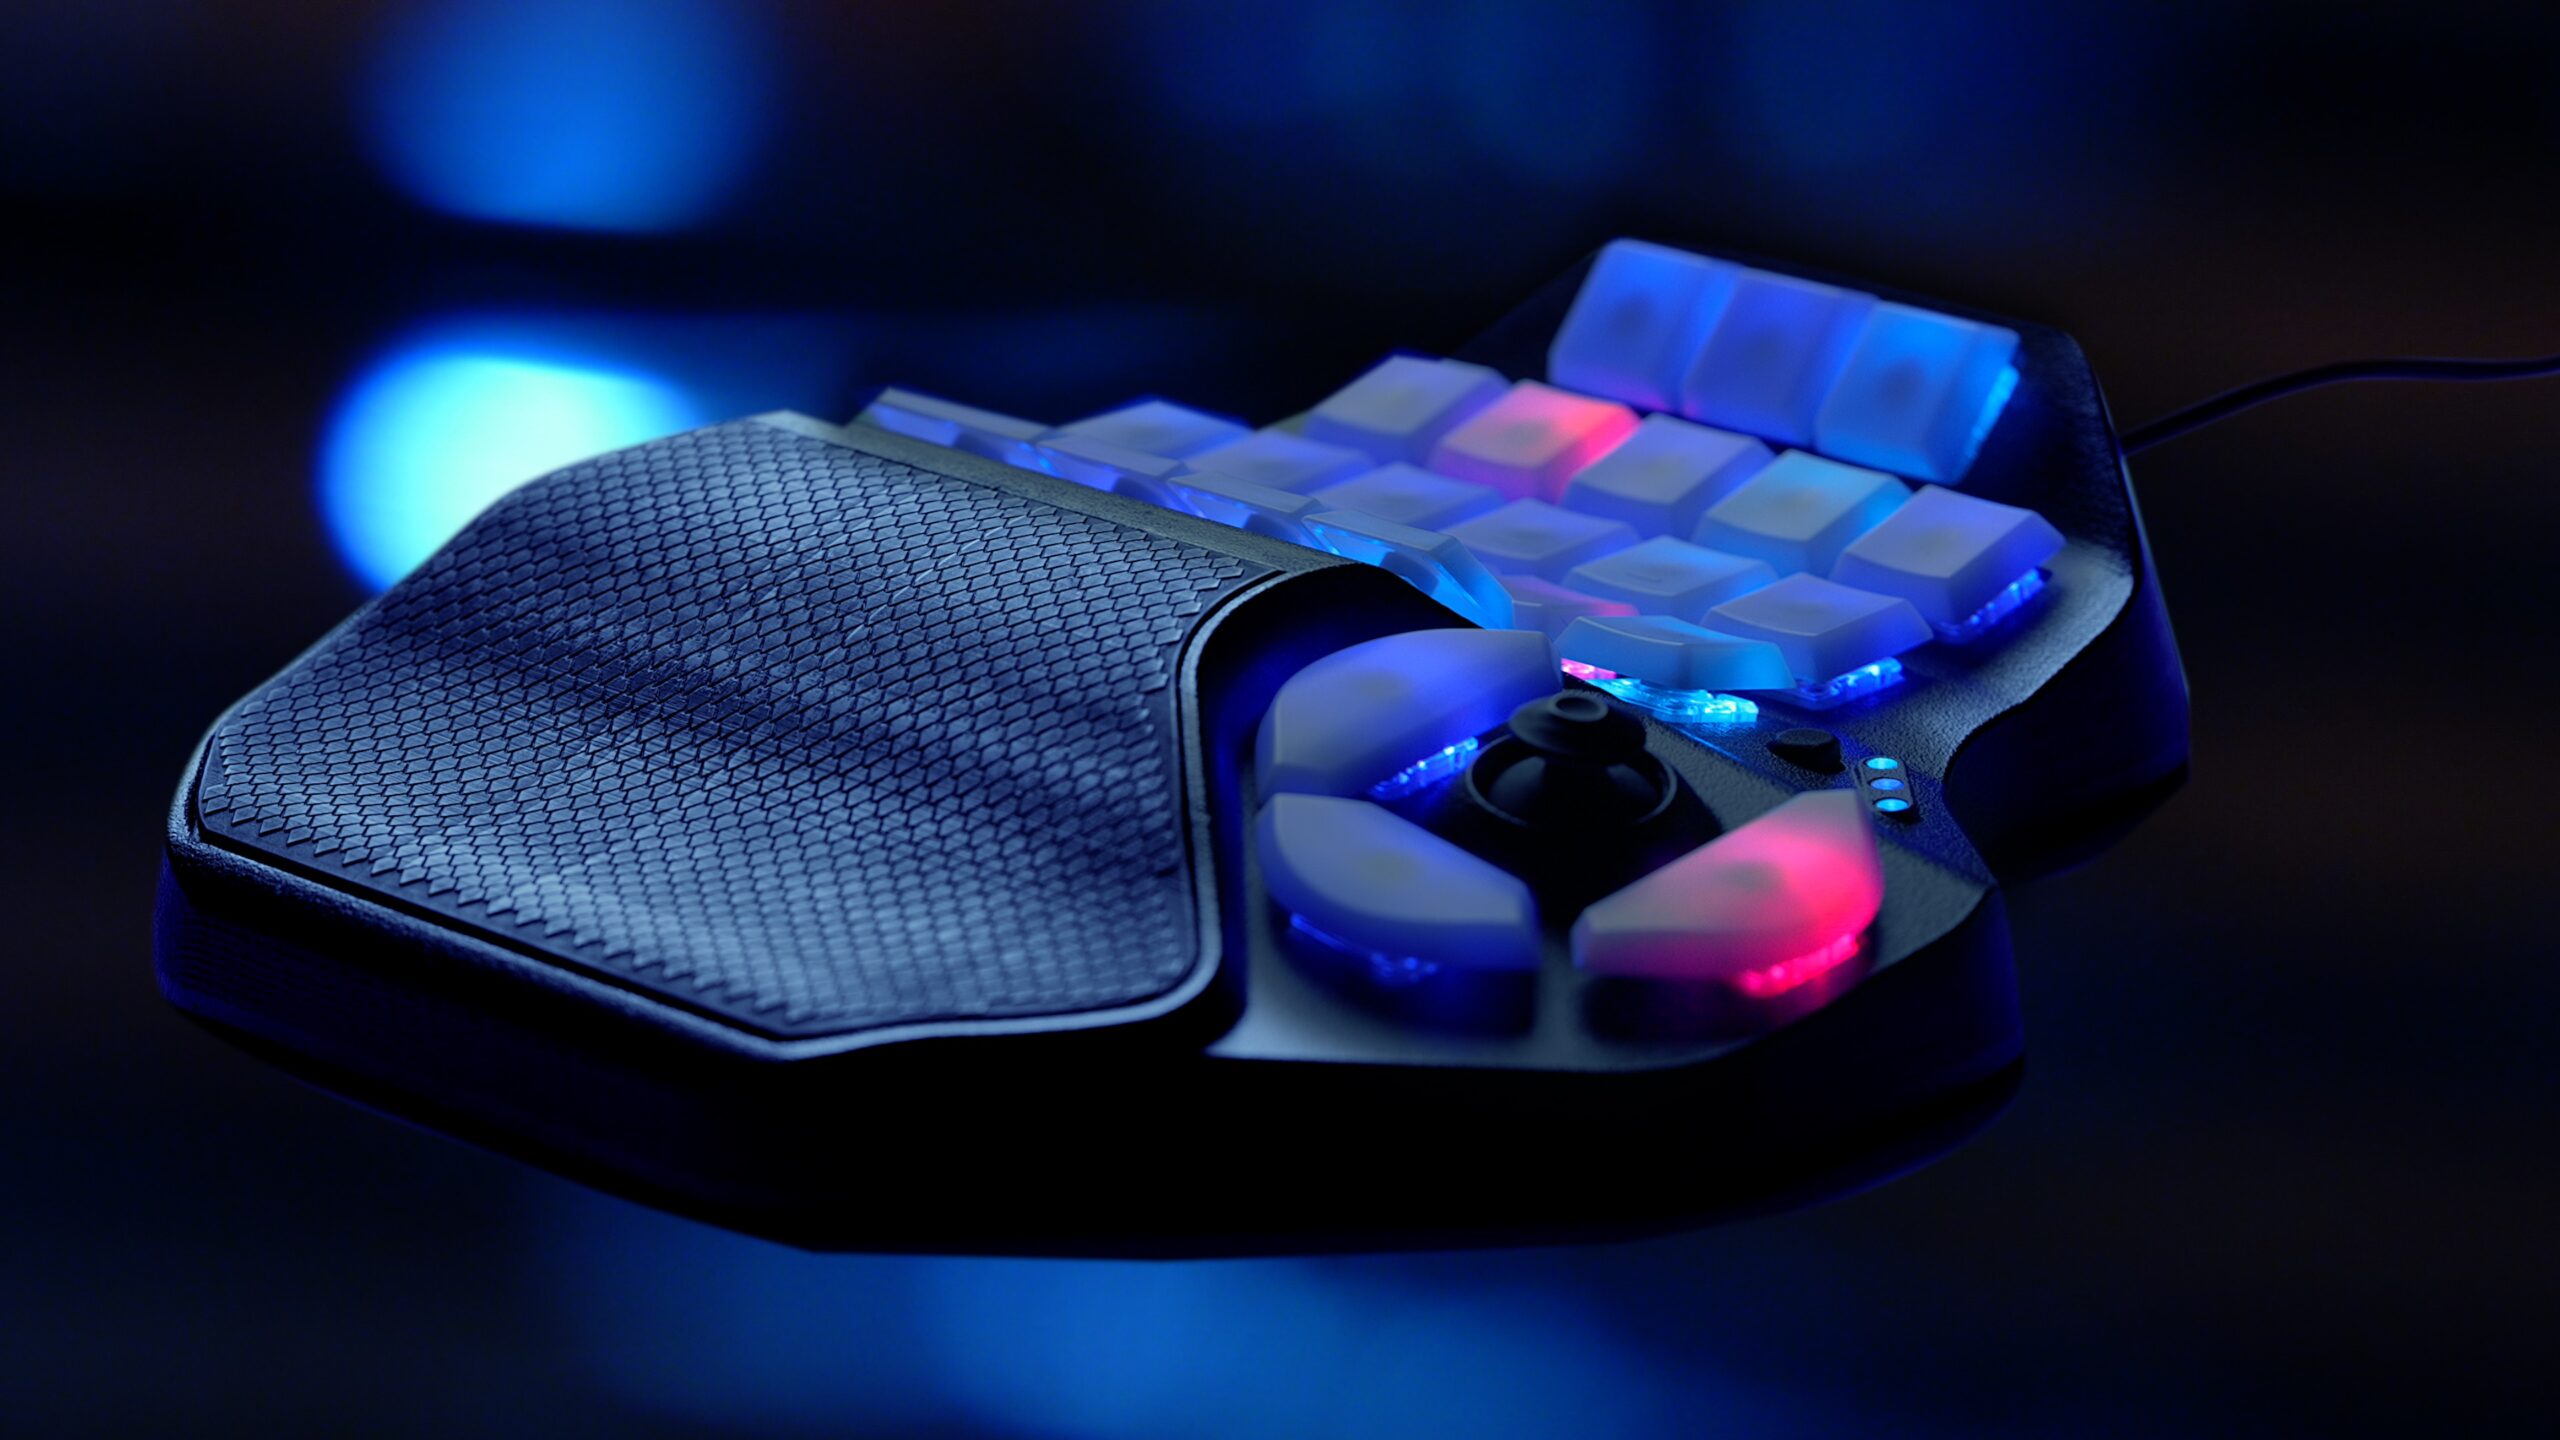 SideQuest by Dunwyvern Gaming is a gaming keypad offering 26 programmable keys, a full motion analog thumbstick, mechanical switches, natural hand contour, customizable macros, and backlit keycaps. 